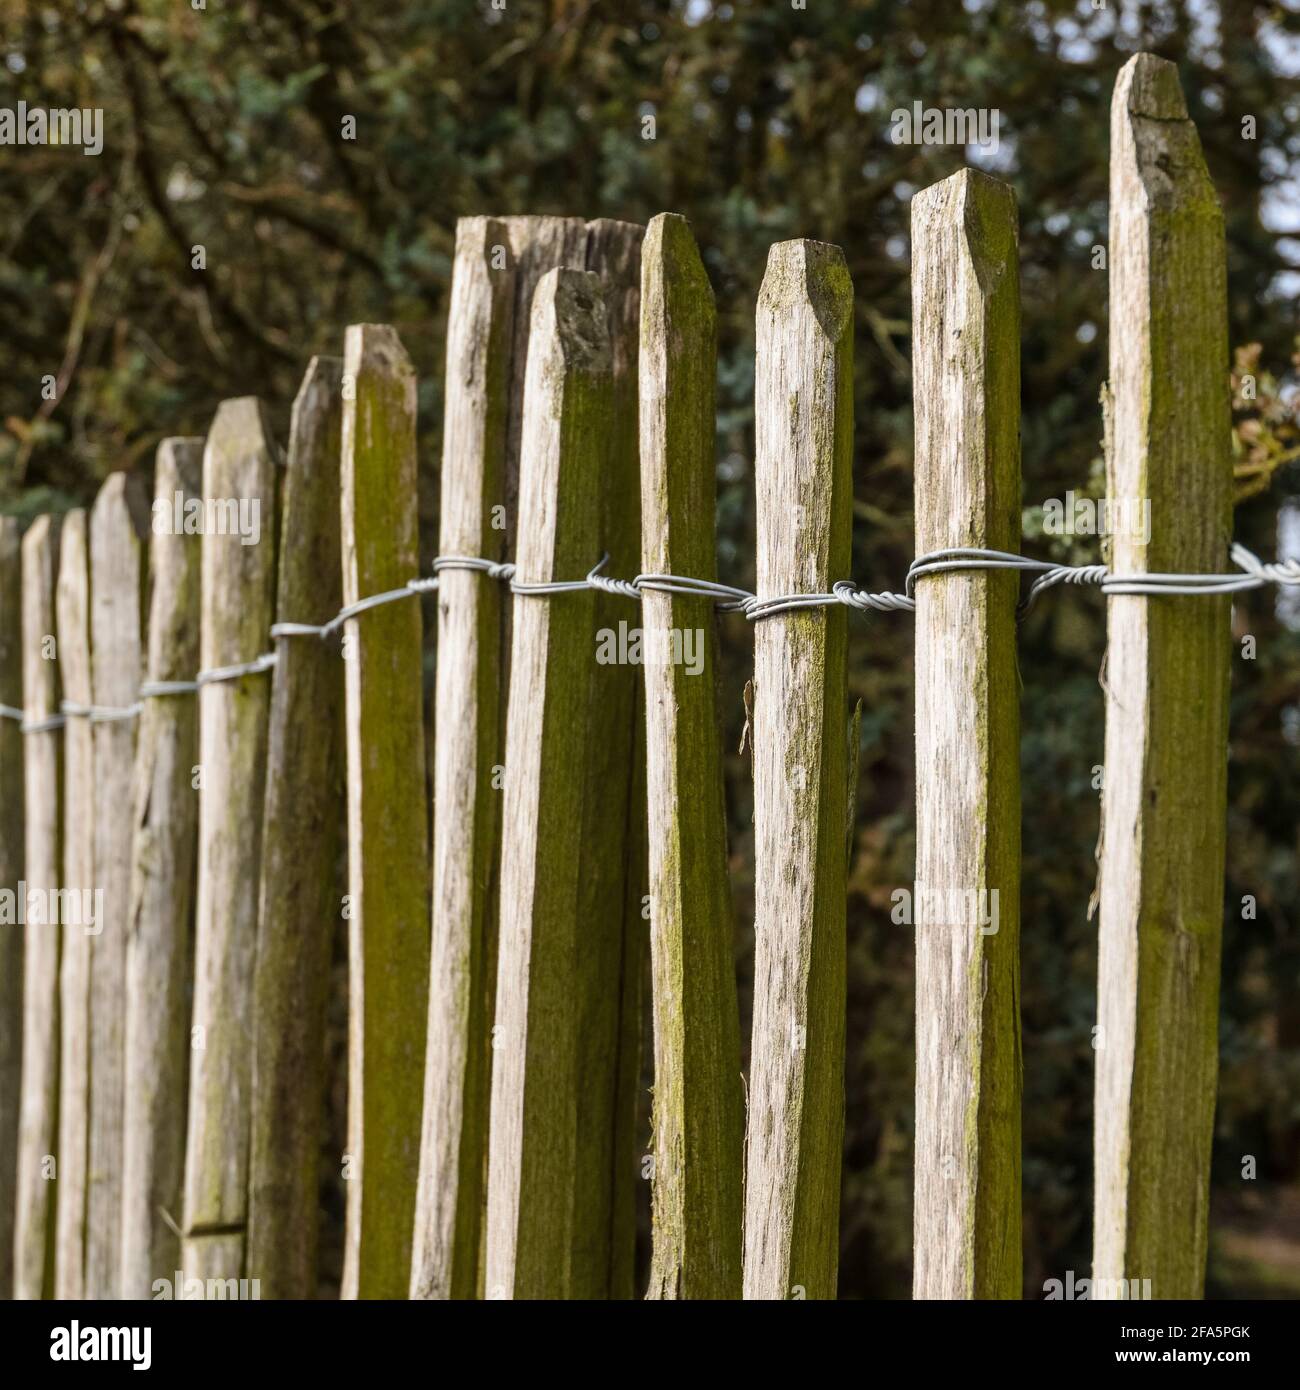 Wooden fence made of thin poles with metal wires around a garden during springtime in Germany, Europe Stock Photo